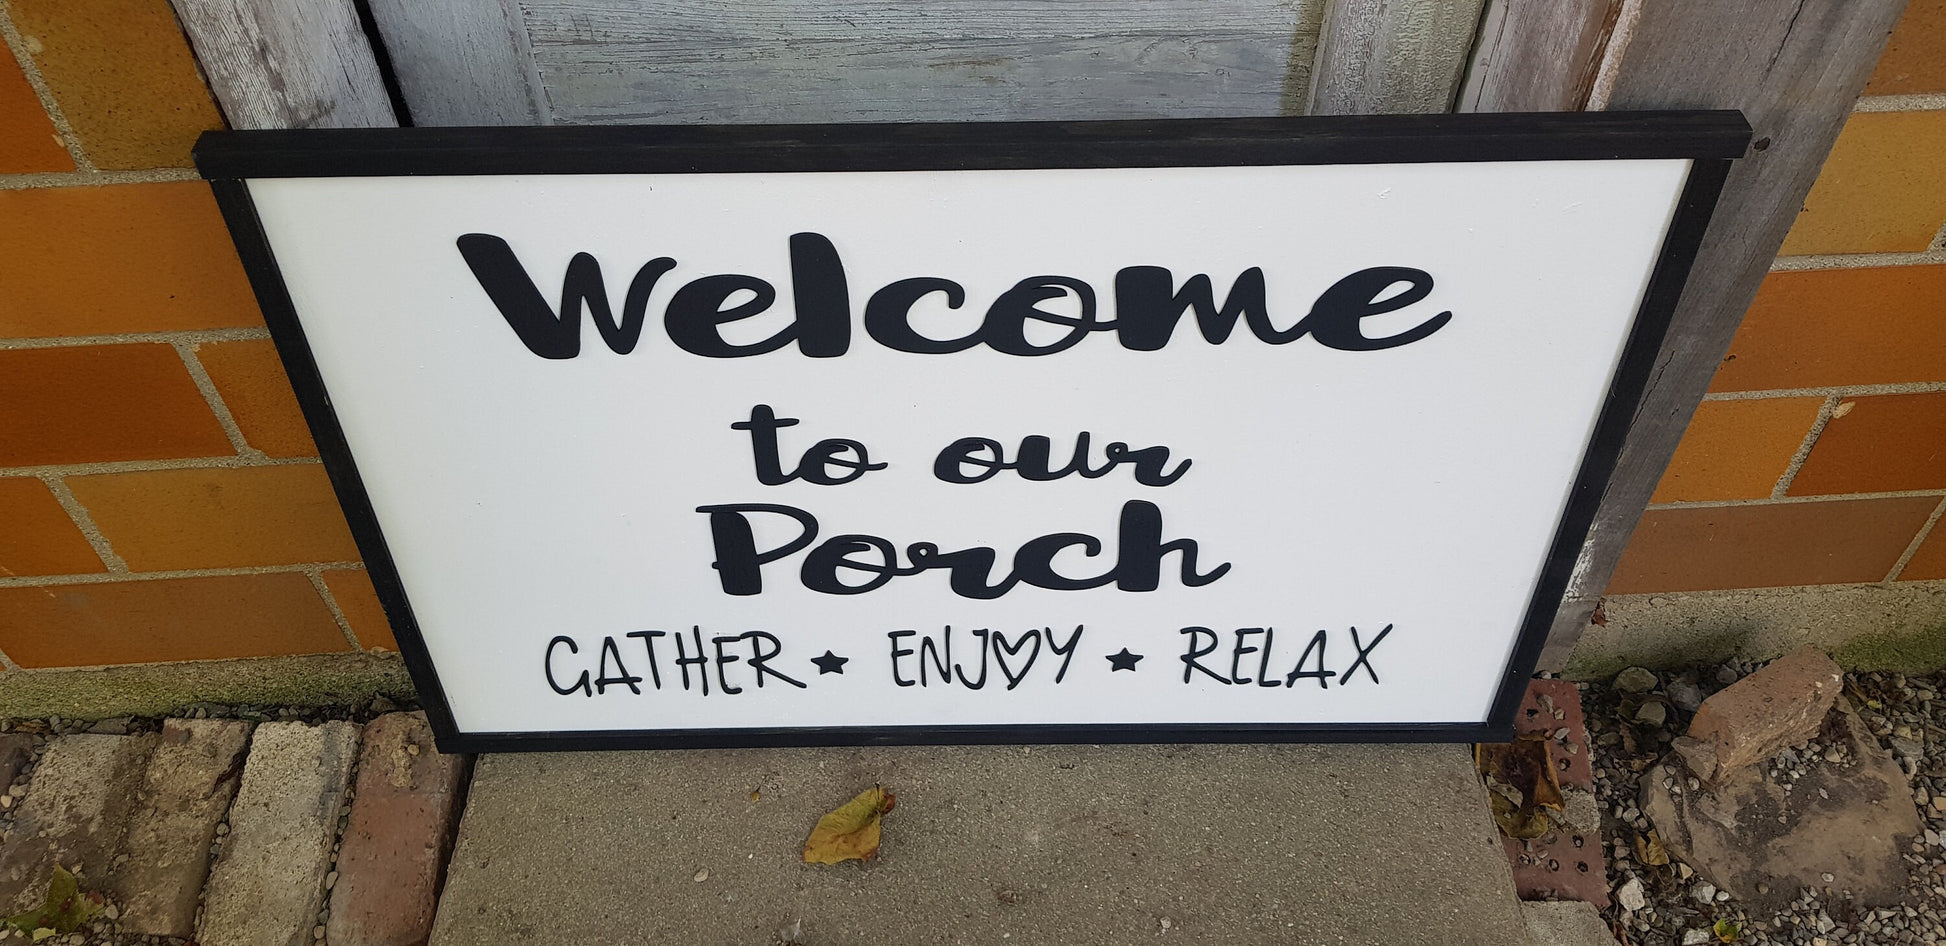 Welcome To Our Porch Large Porch Sign Gather Enjoy Relax Welcome Signage Neighbors Family Friends Rustic Country 3D Raised Handmade Hearts